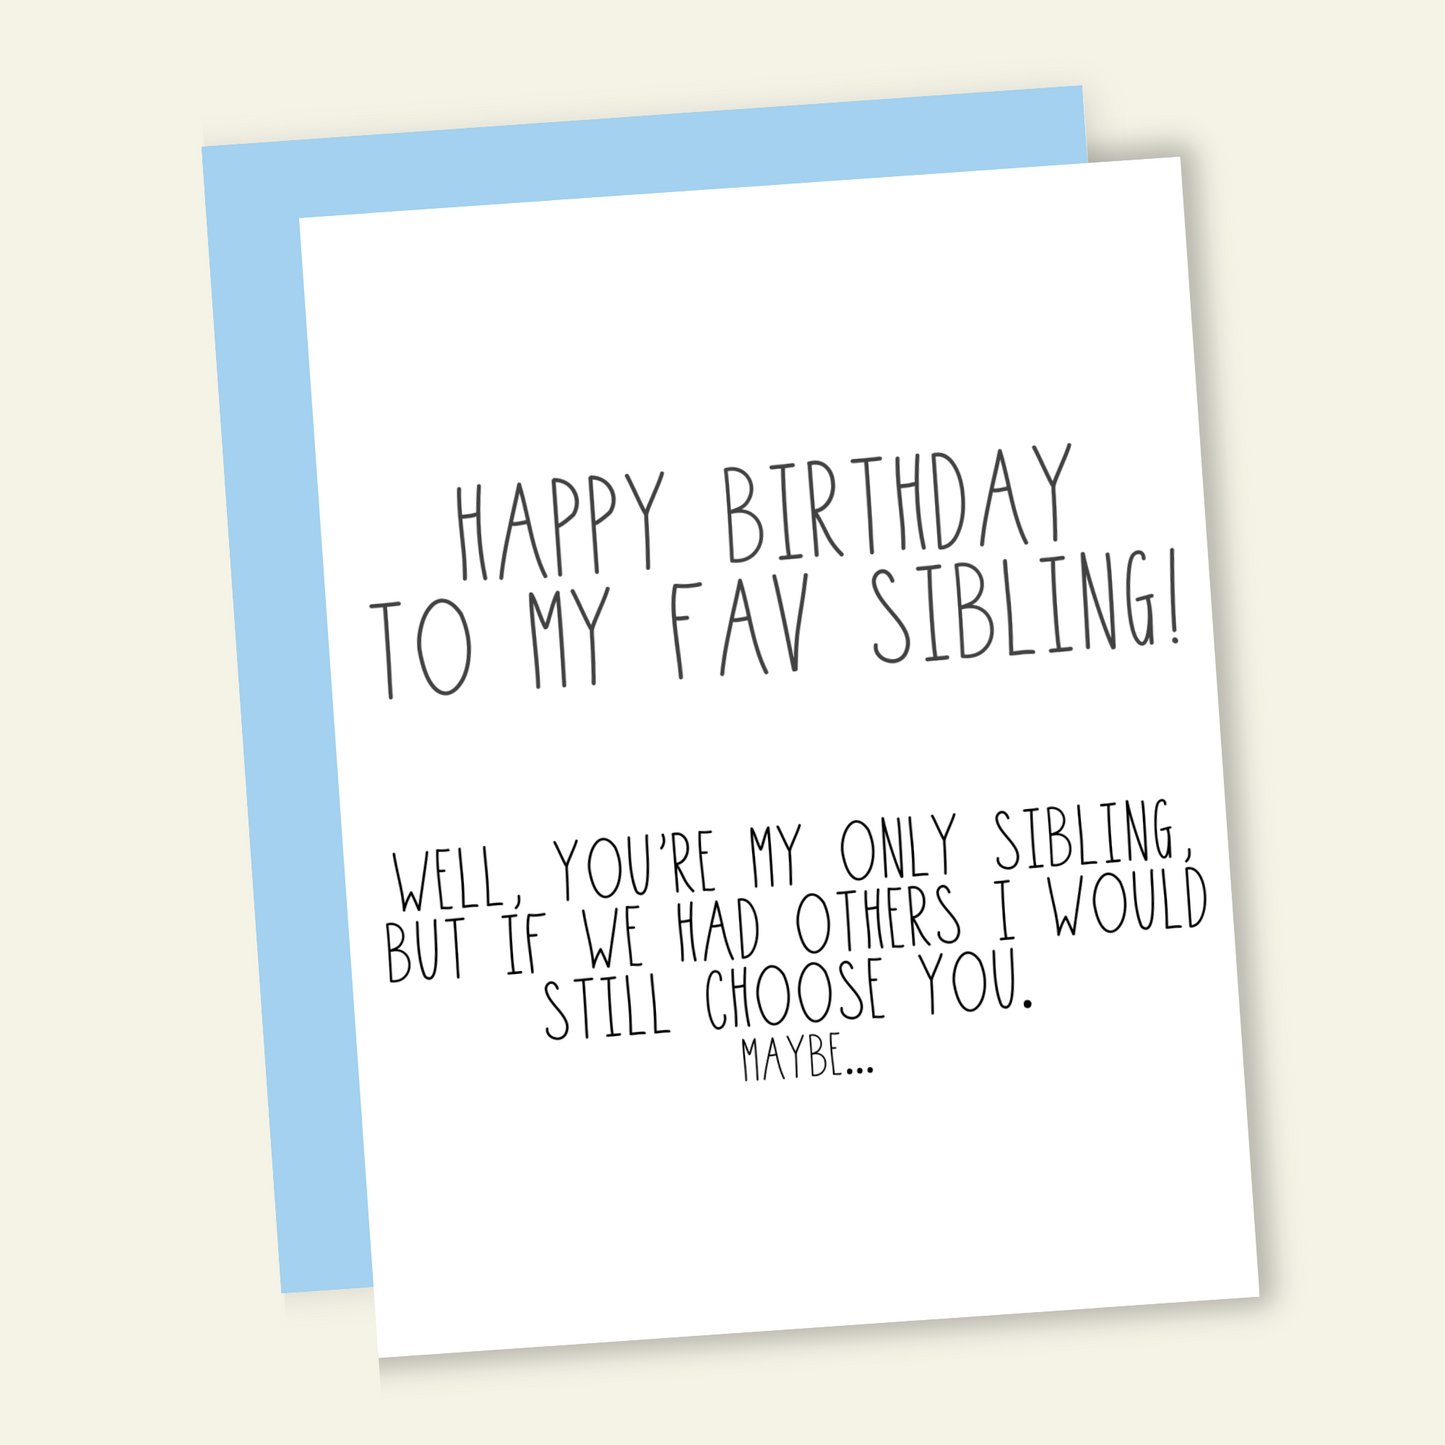 To My Favorite/Only Sibling... Birthday Card